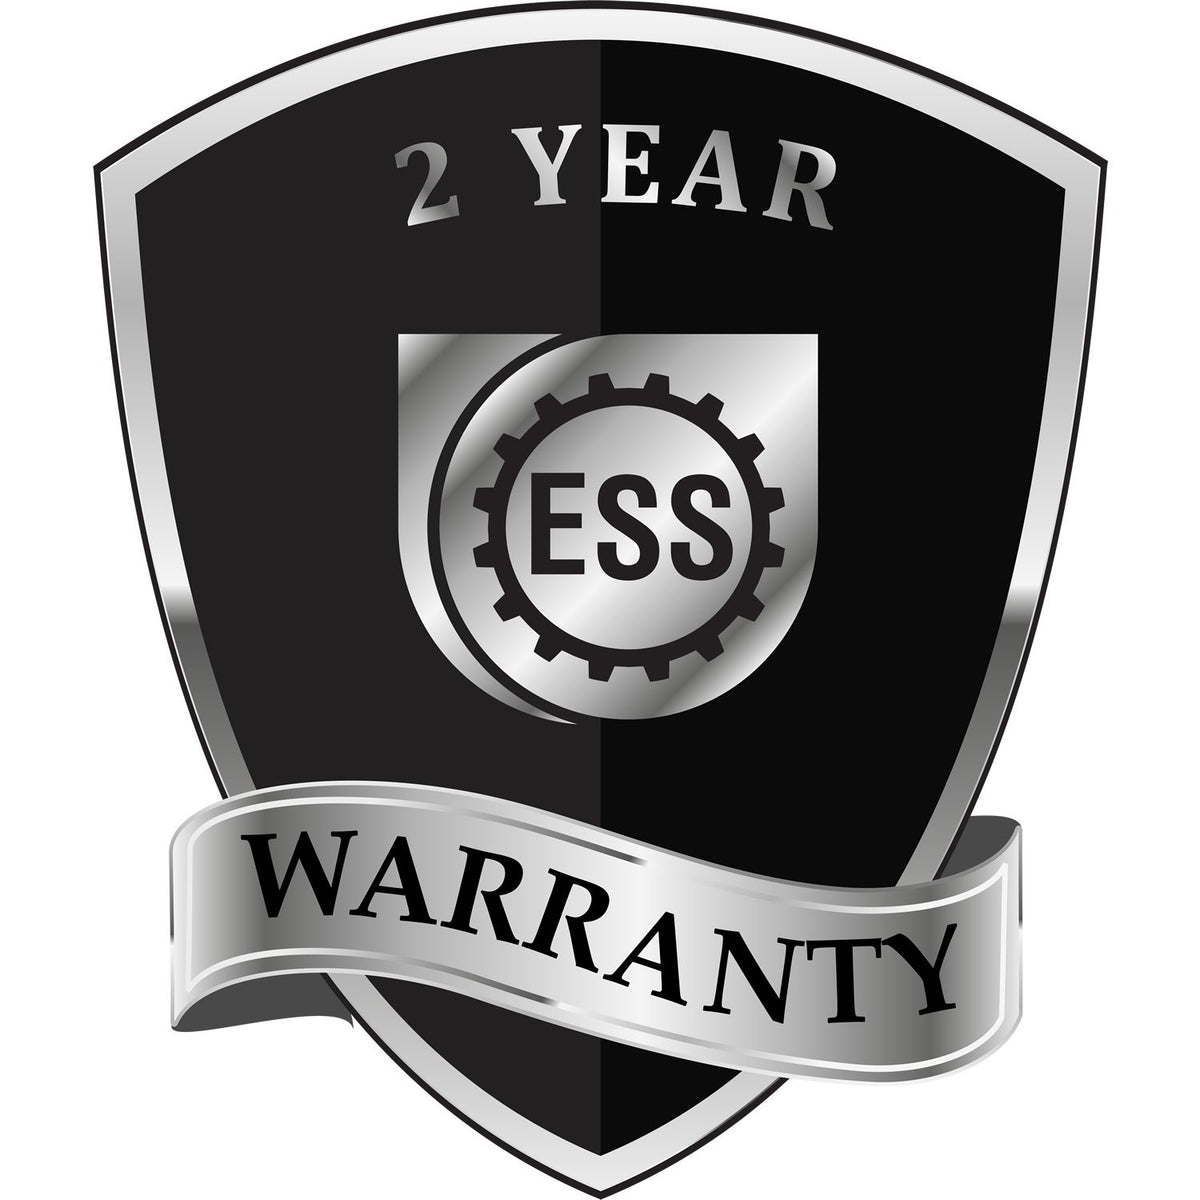 A black and silver badge or emblem showing warranty information for the Hybrid Maryland Engineer Seal